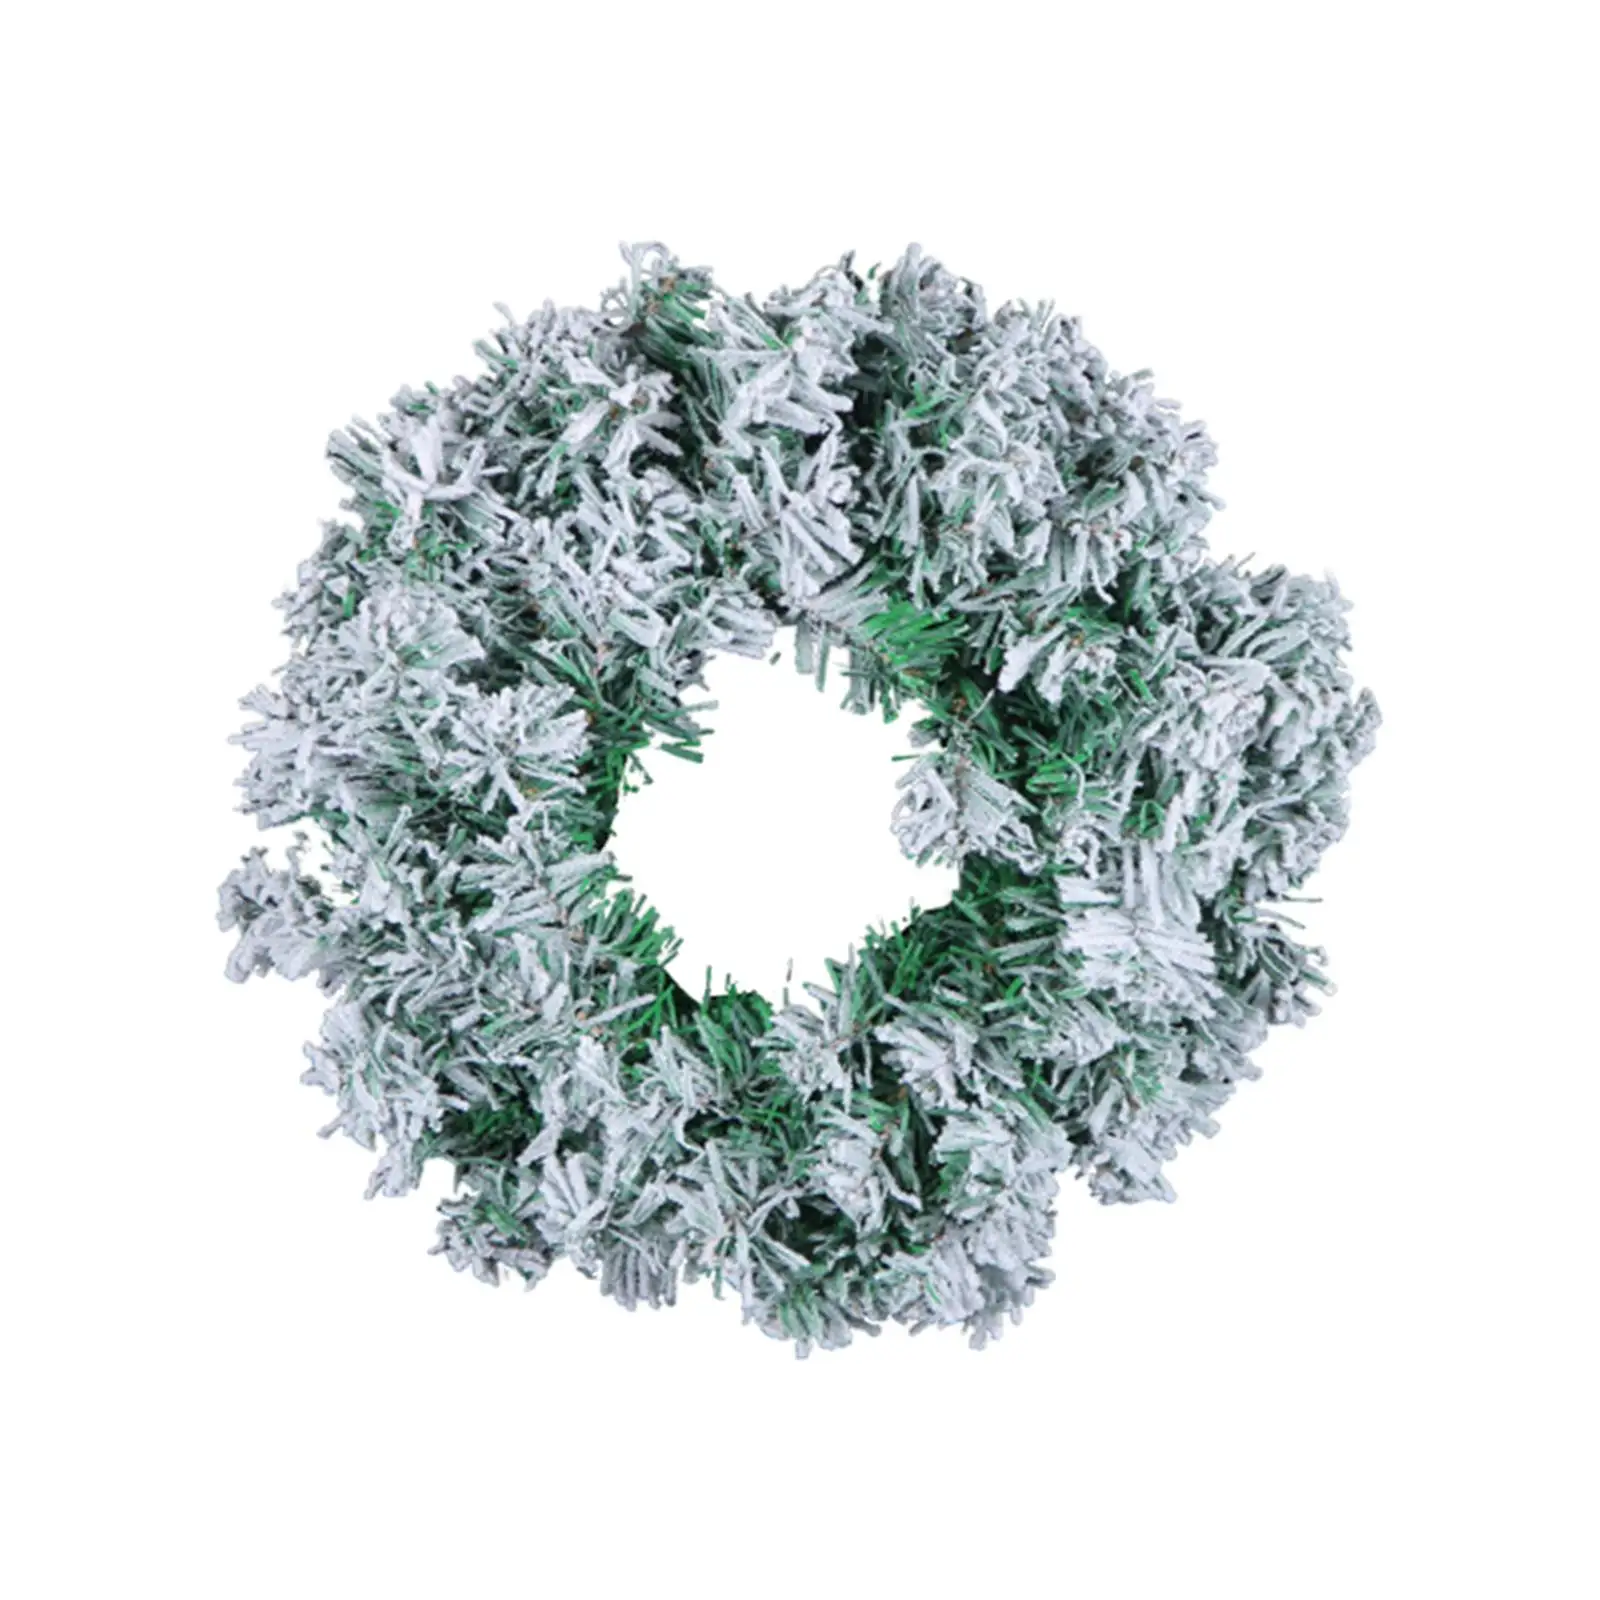 Artificial Snowy Christmas Wreath Xmas Decor Realistic Green Hanging Ornament for Wall Holiday Indoor Outdoor Window Wedding